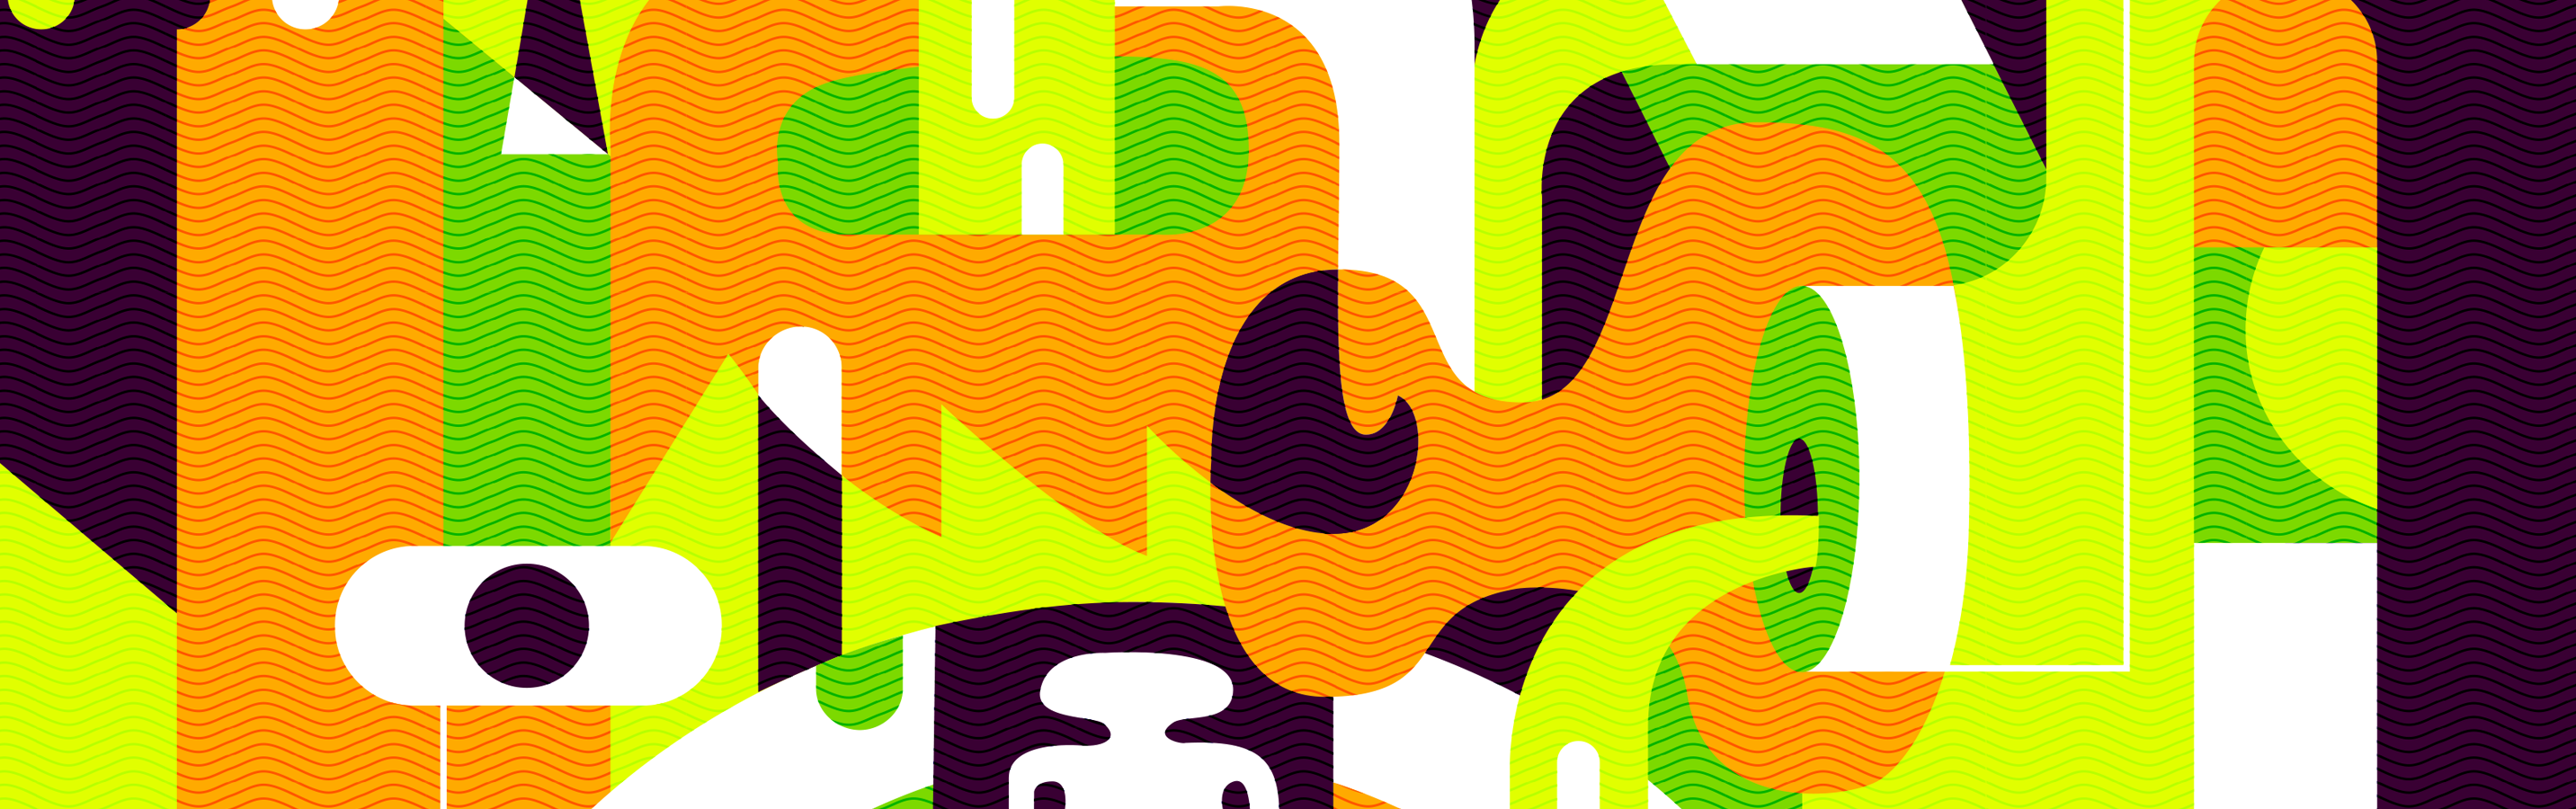 Ffurp Abstract banner